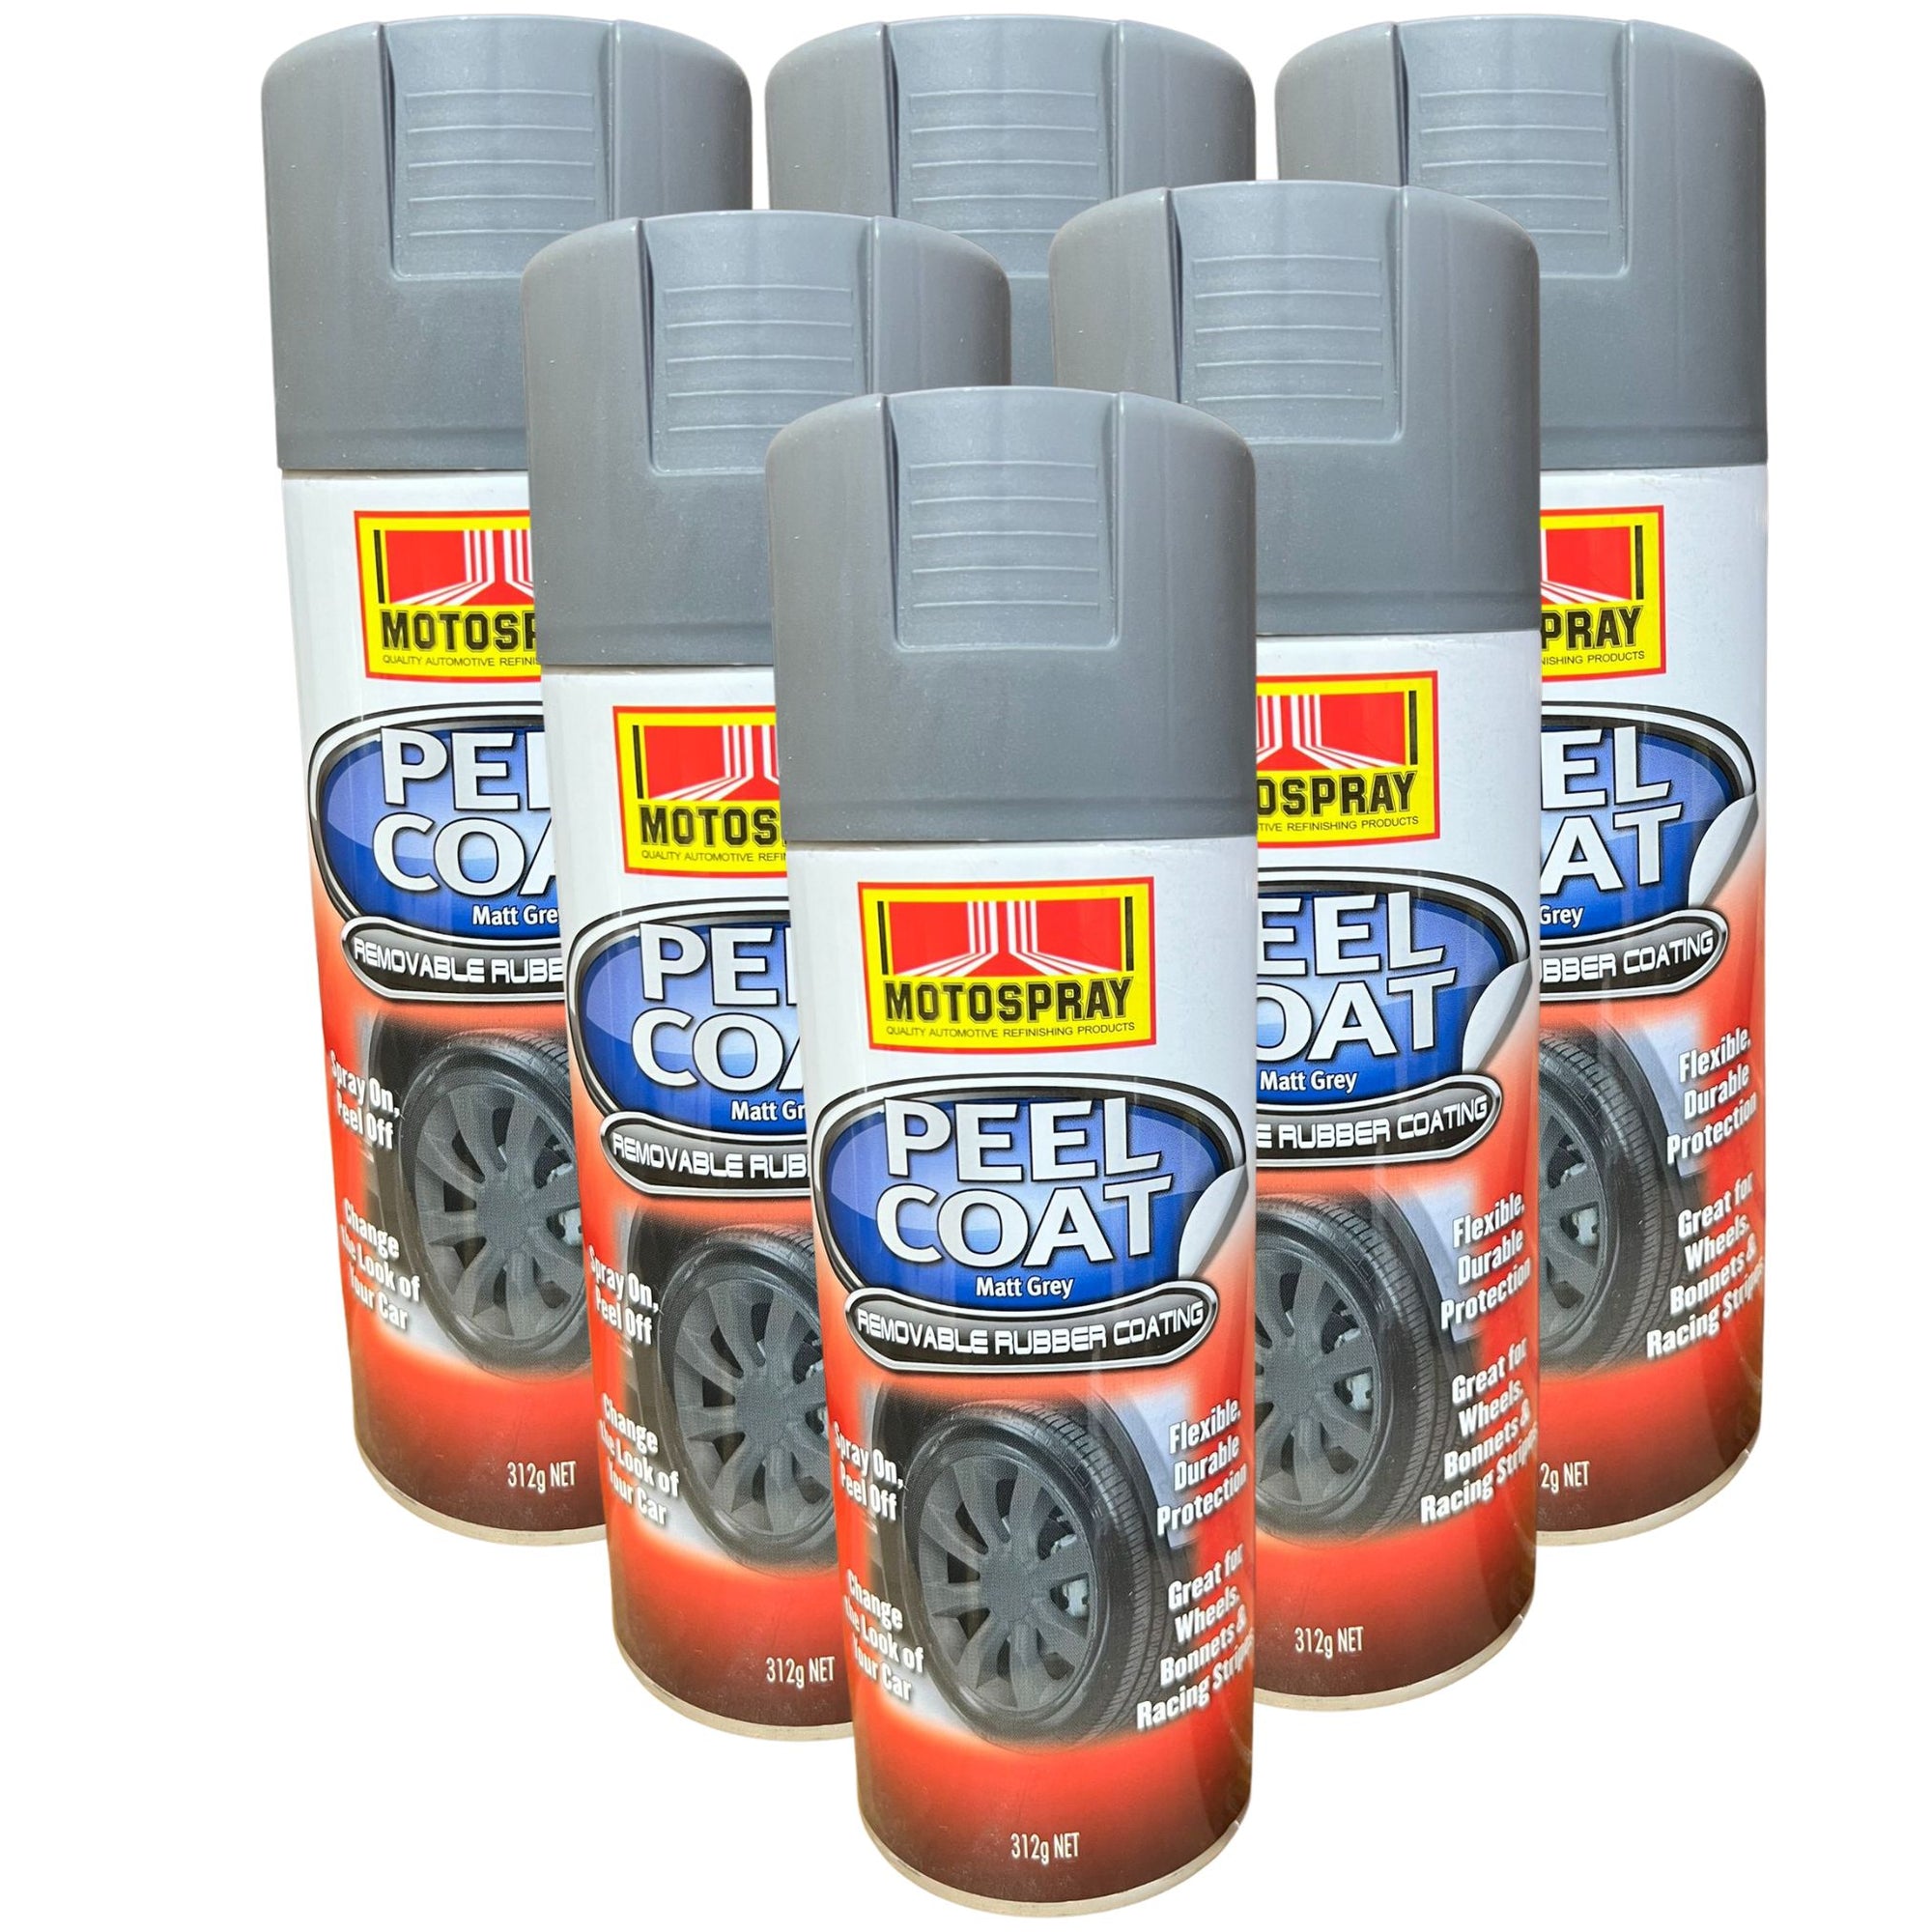 Motospray Peel Coat Rubberized Removable Coating - Matt Grey - 6 Pack - South East Clearance Centre